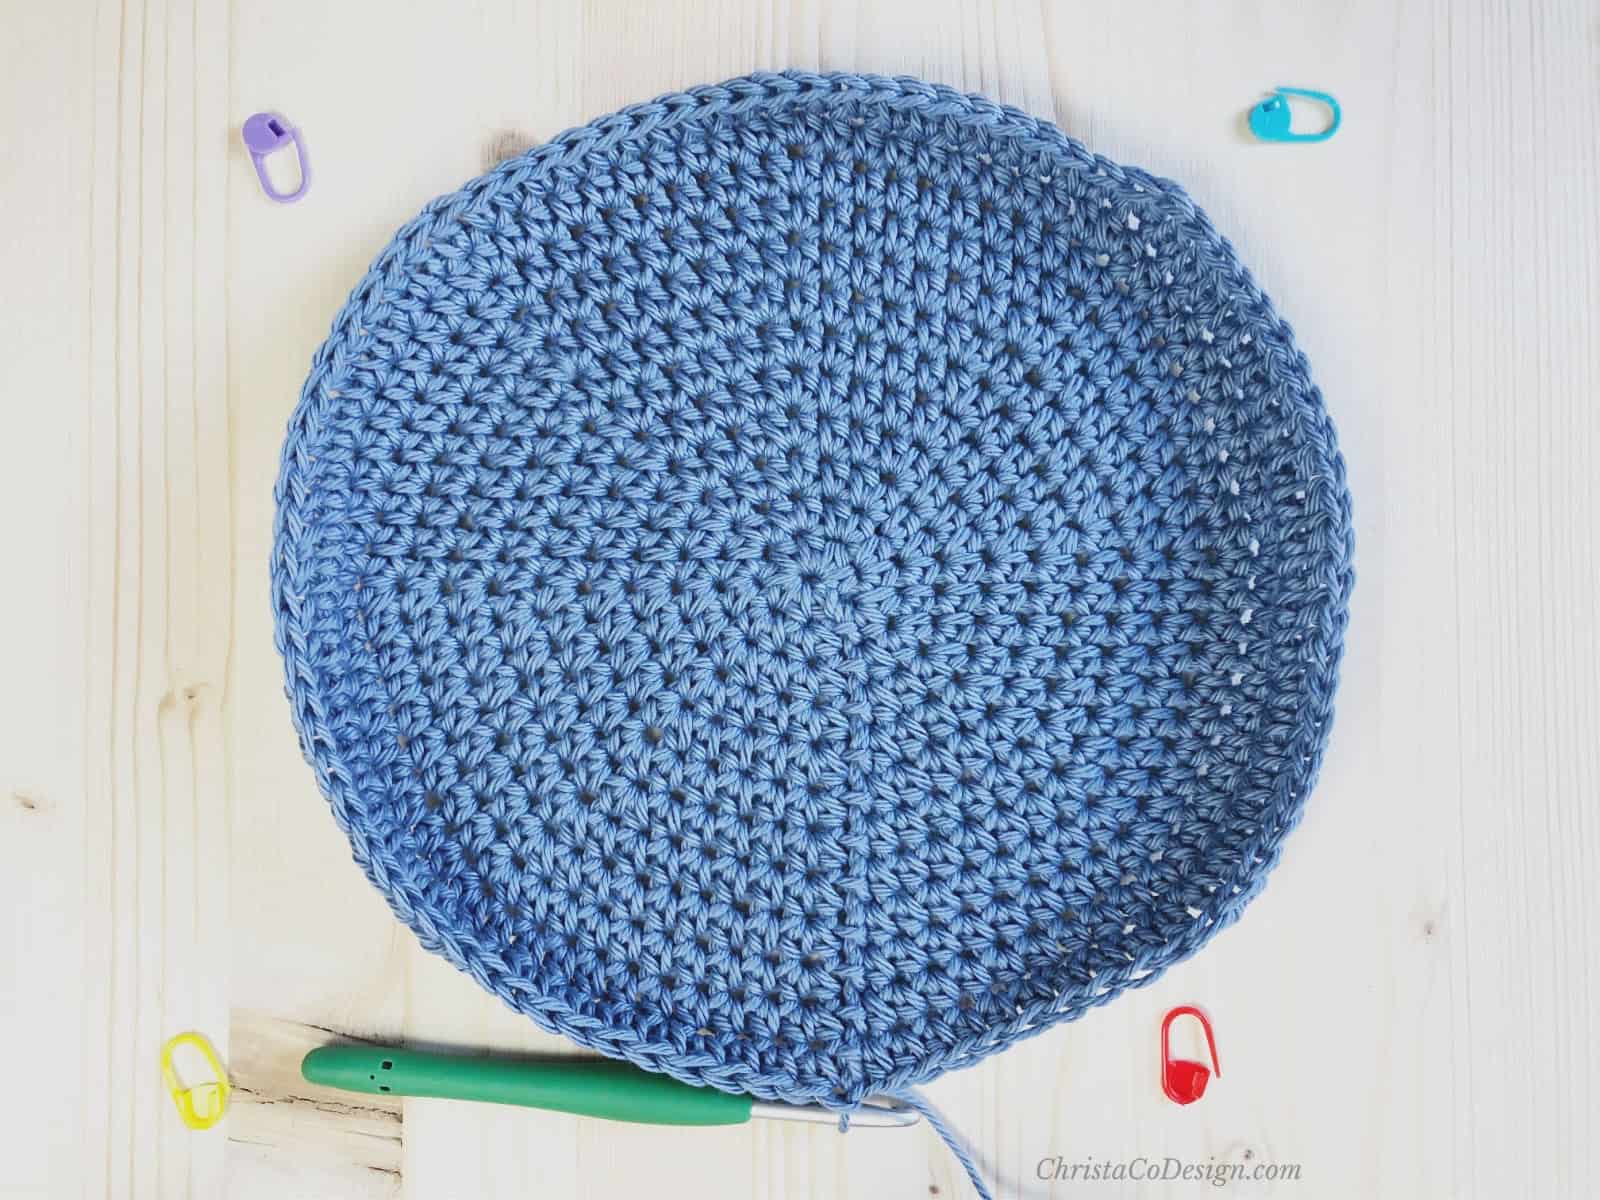 Blue round crochet circle with stitch markers removed.